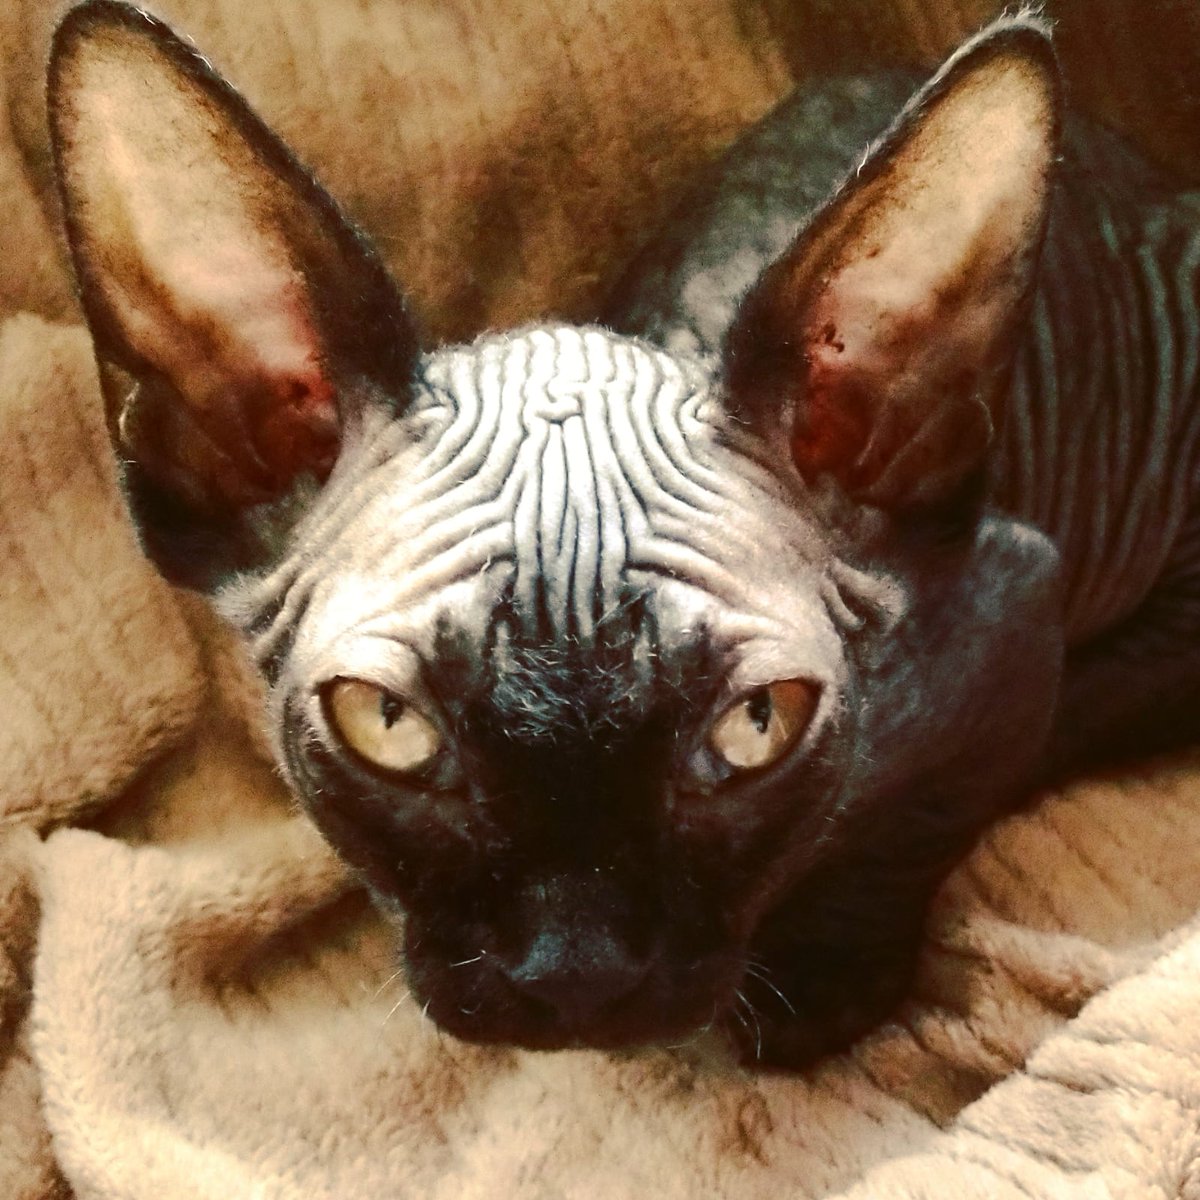 Gonna rest this afternoon hooman best not wake me up. #CatsOfTwitter #sphynxcats #resting #bambinosphynx #harrypotter #wrincleface #dogeater